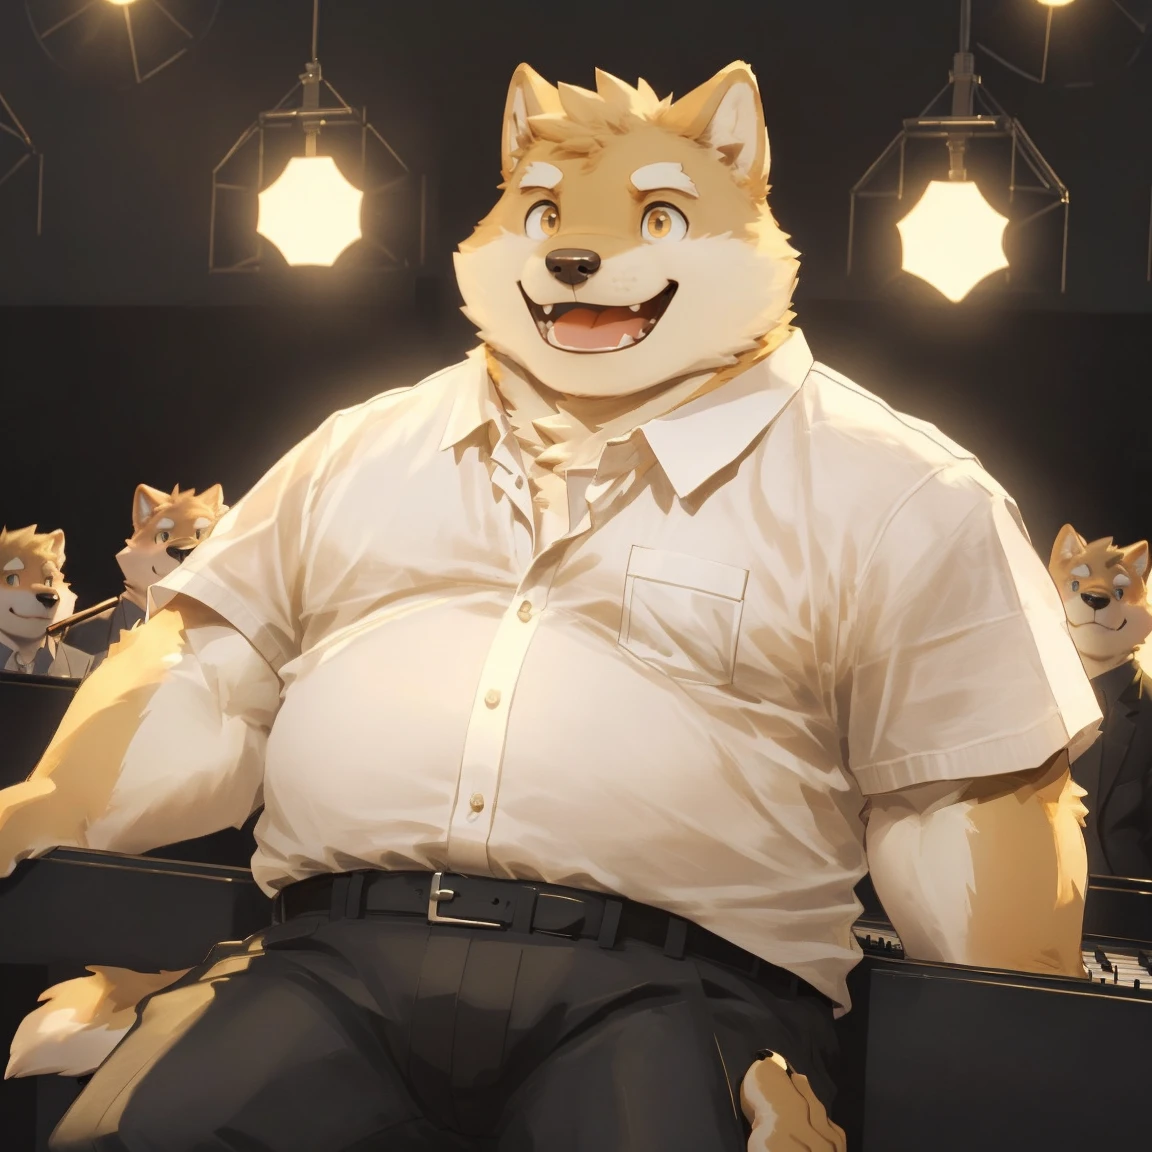 masterpiece, best quality, 8k resolution, Very detailed, hairy，Shiba Inu，(Black hair)，(((golden fur)))，(((Golden Eyes)))，Chubby，Chubby face，(((White shirt)))，(((Loose shirt)))，((Black pants))，(((For the audience)))，Highest quality scene，(((Solitary)))，(((solitary)))，portrait，((play piano))，((light))，((Gentle))，(((Facing the audience)))，(((earnest)))，(((Round face)))，(((Smiling)))